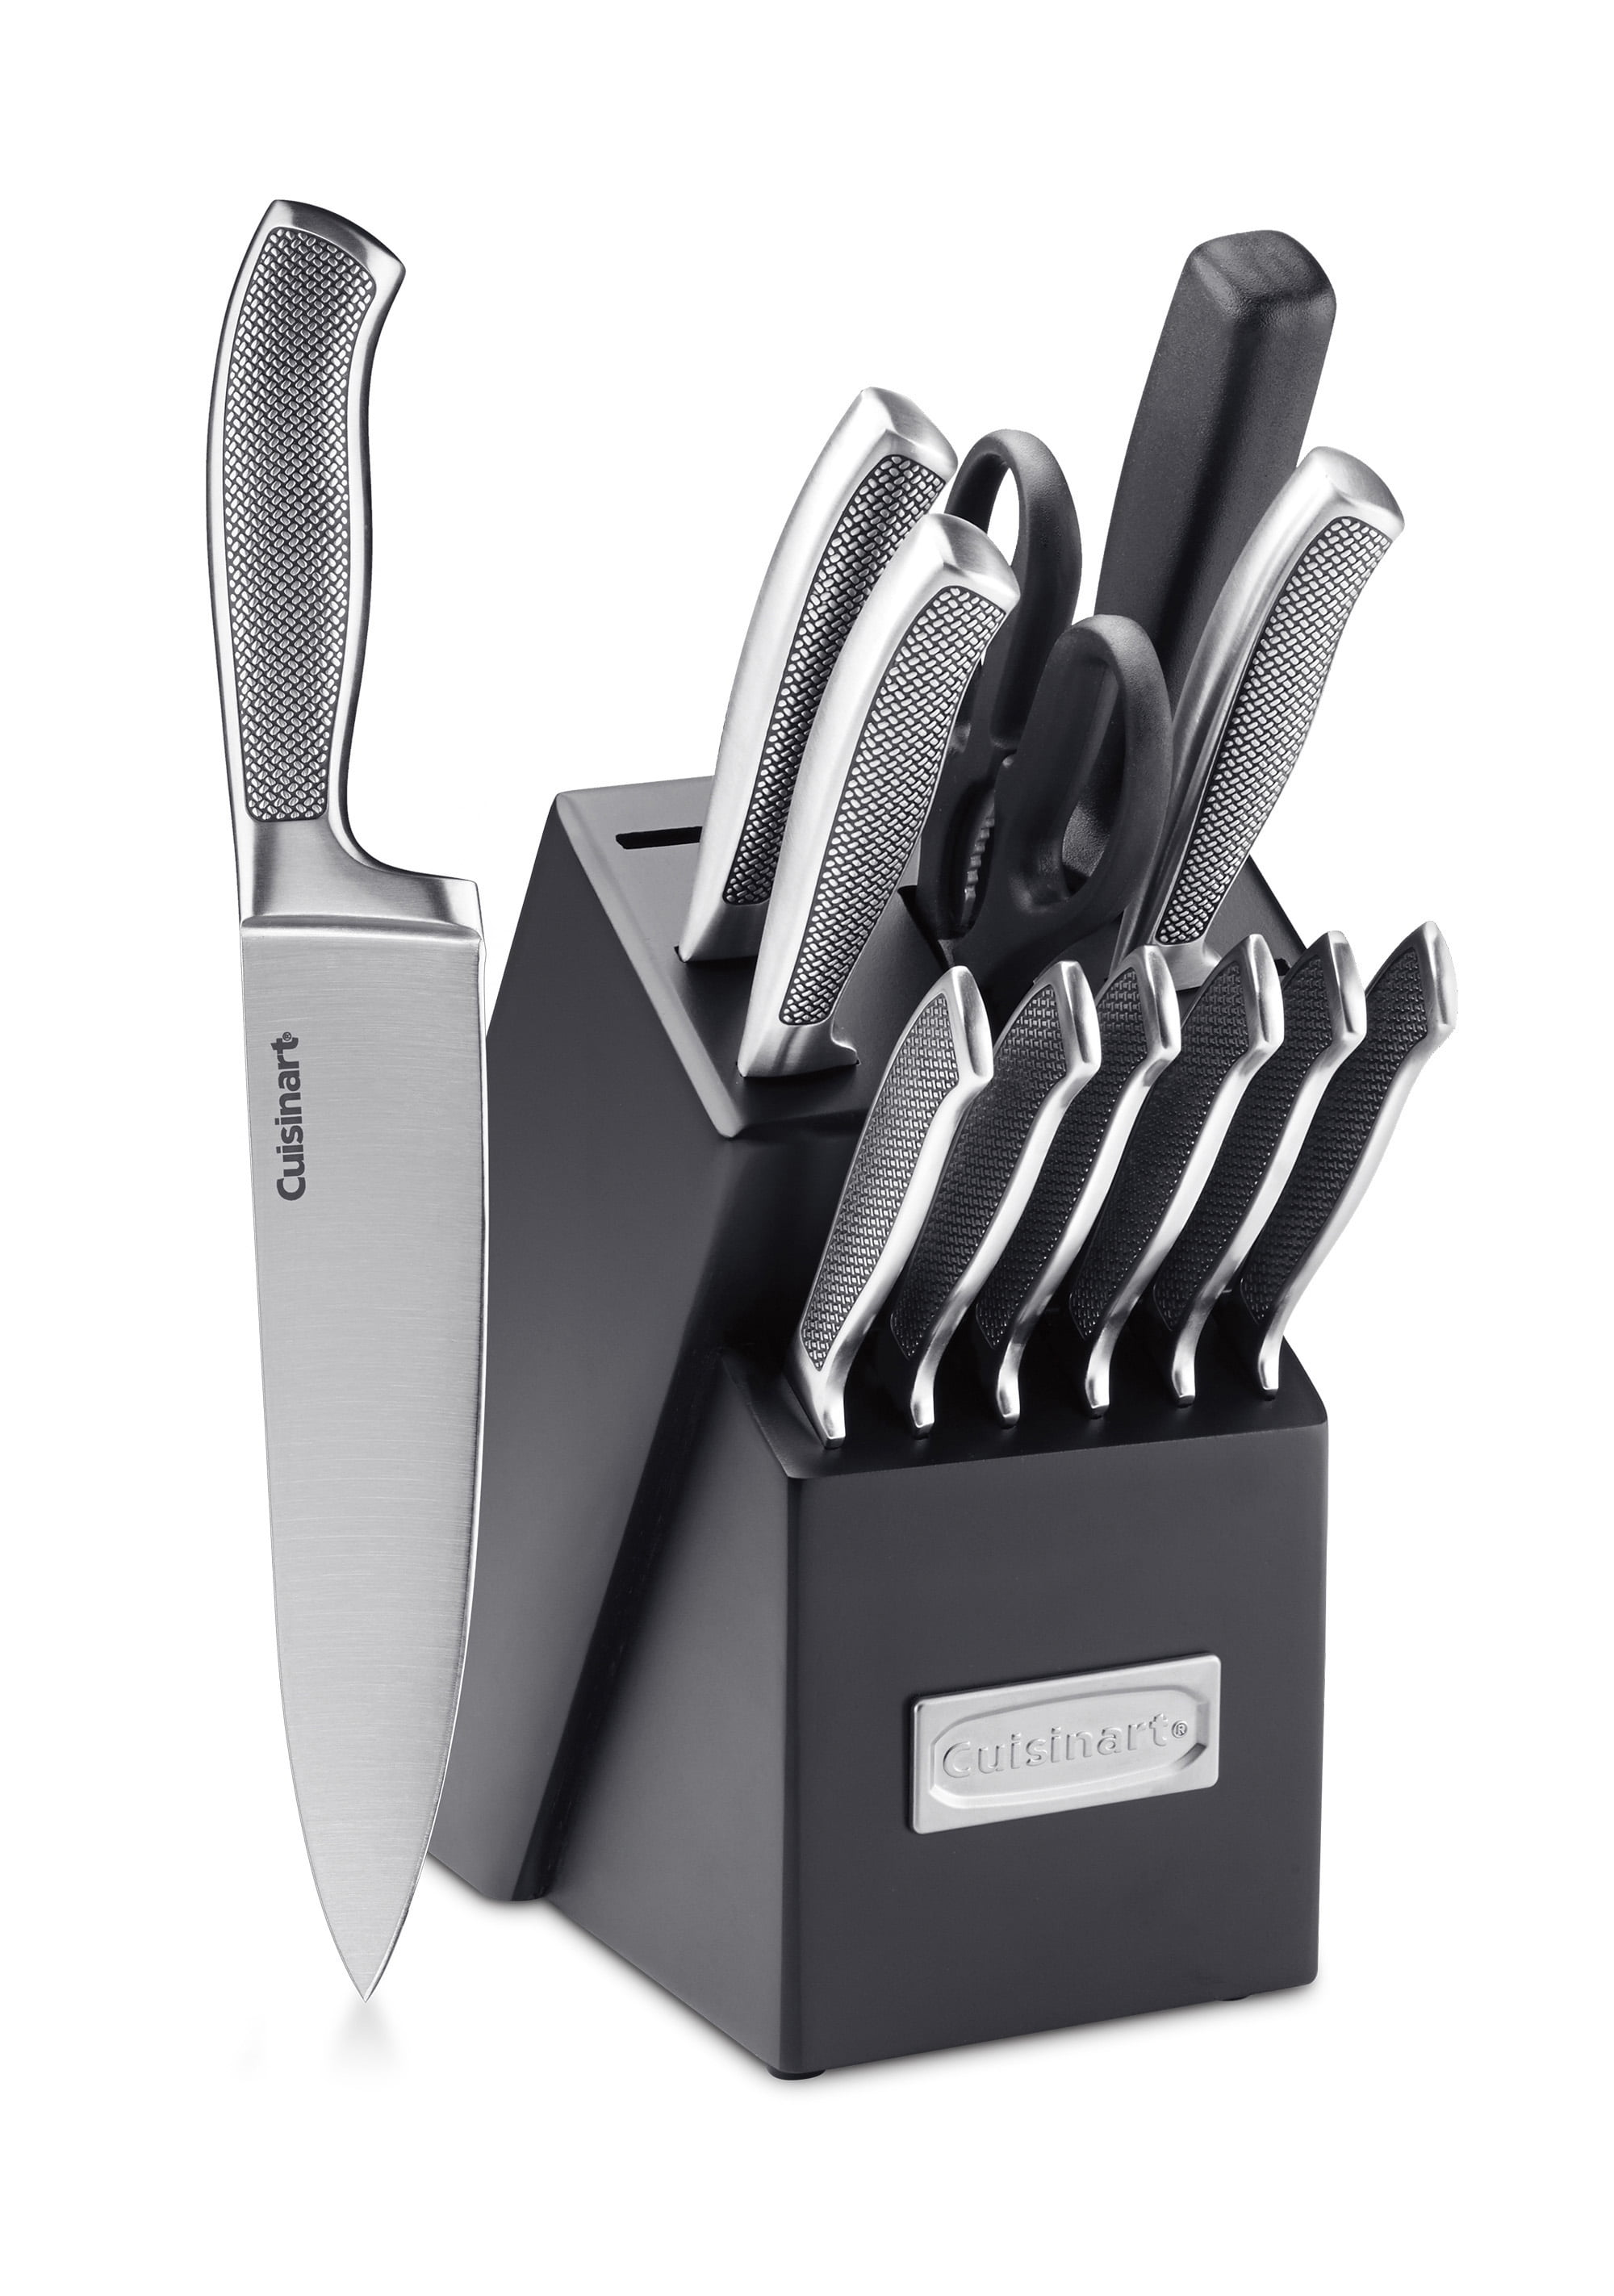 Cuisinart C77SS-13P Graphix Collection 13-Piece Stainless Steel